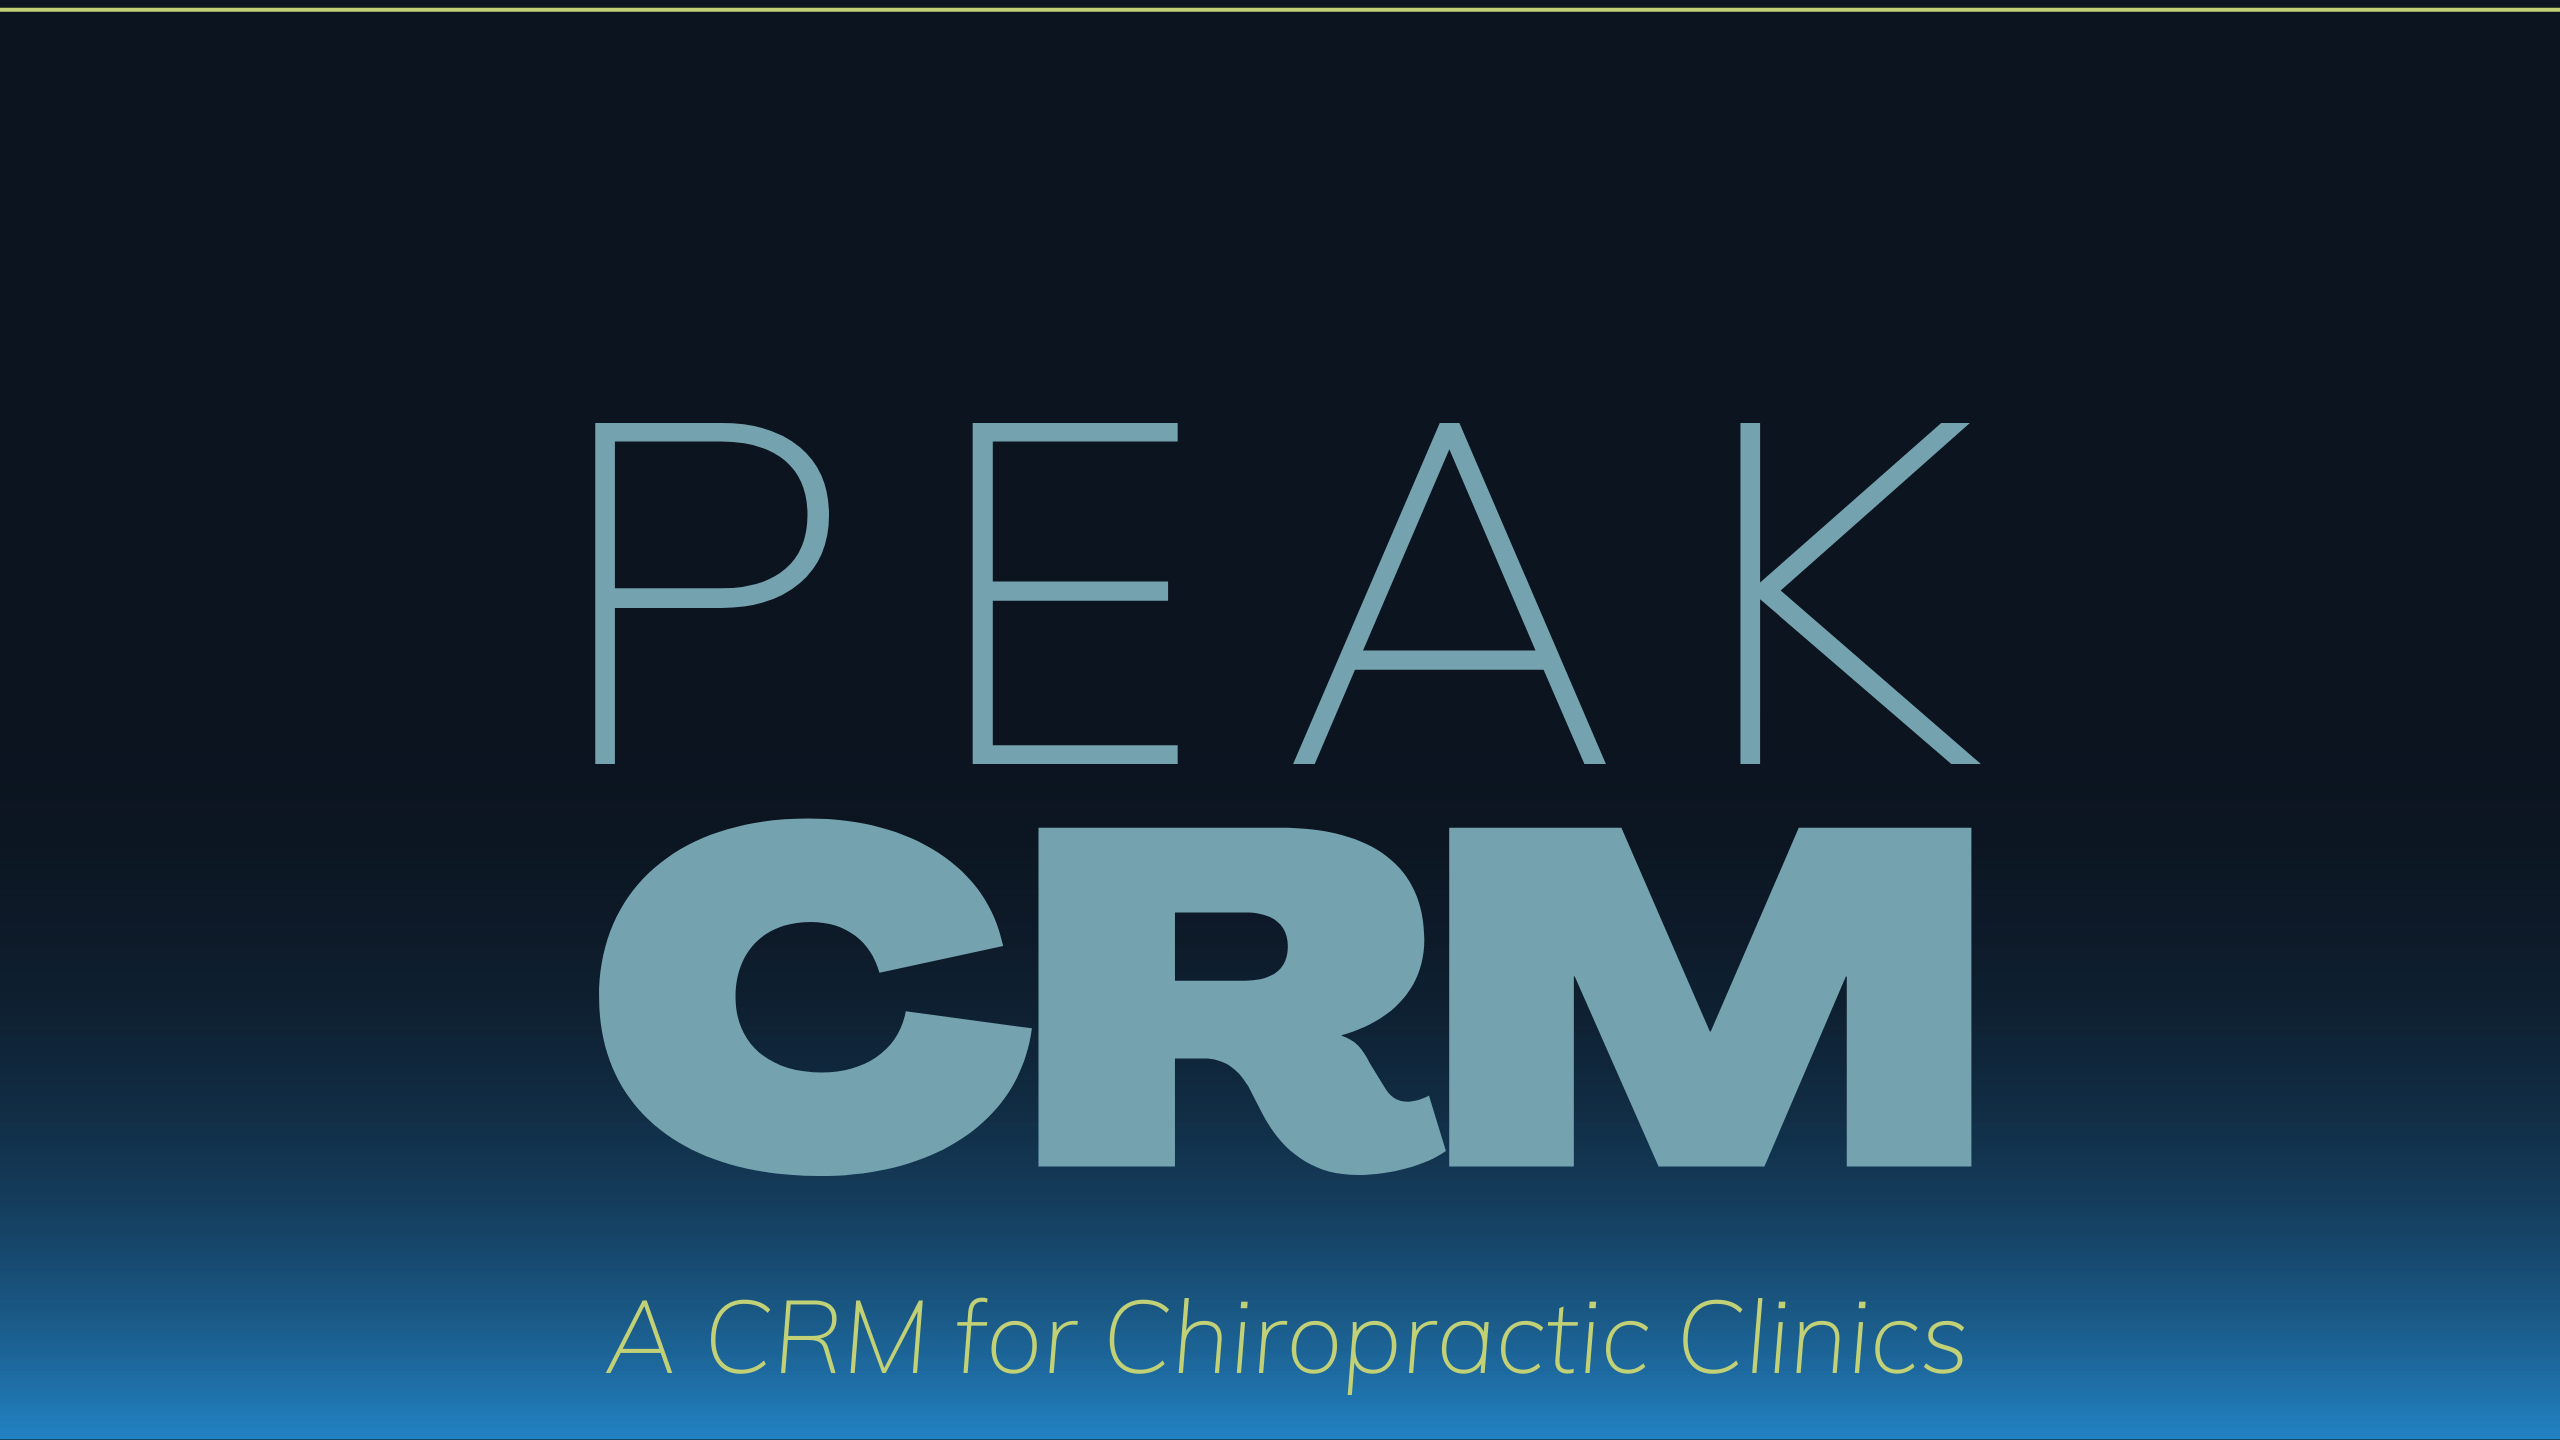 PeakCRM for Chiropractic Clinics